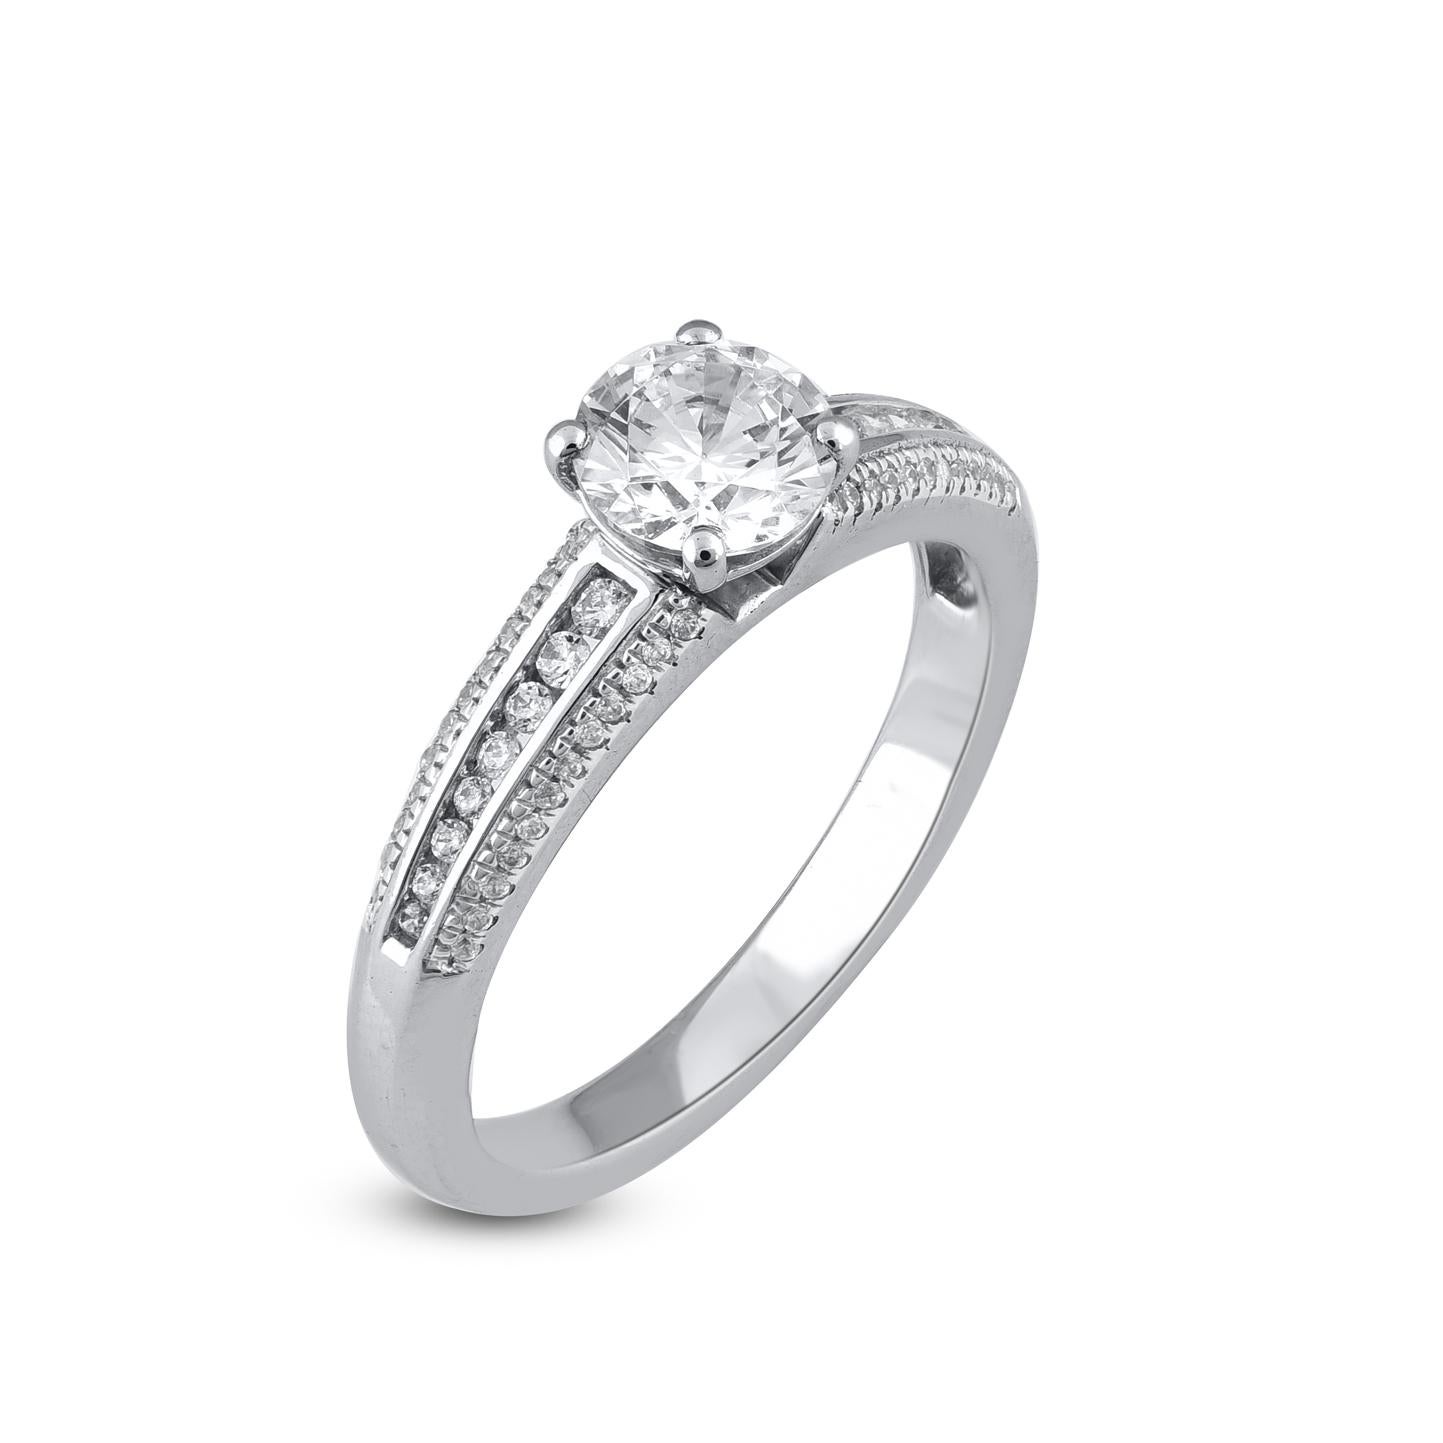 Wow her with the scintilating look of this diamond ring. This engagement ring features 0.80 ct of Centre stone and 0.20 ct shank lined diamonds is beautifully designed and studded with 64 round diamond set in prong and channel setting. We only use